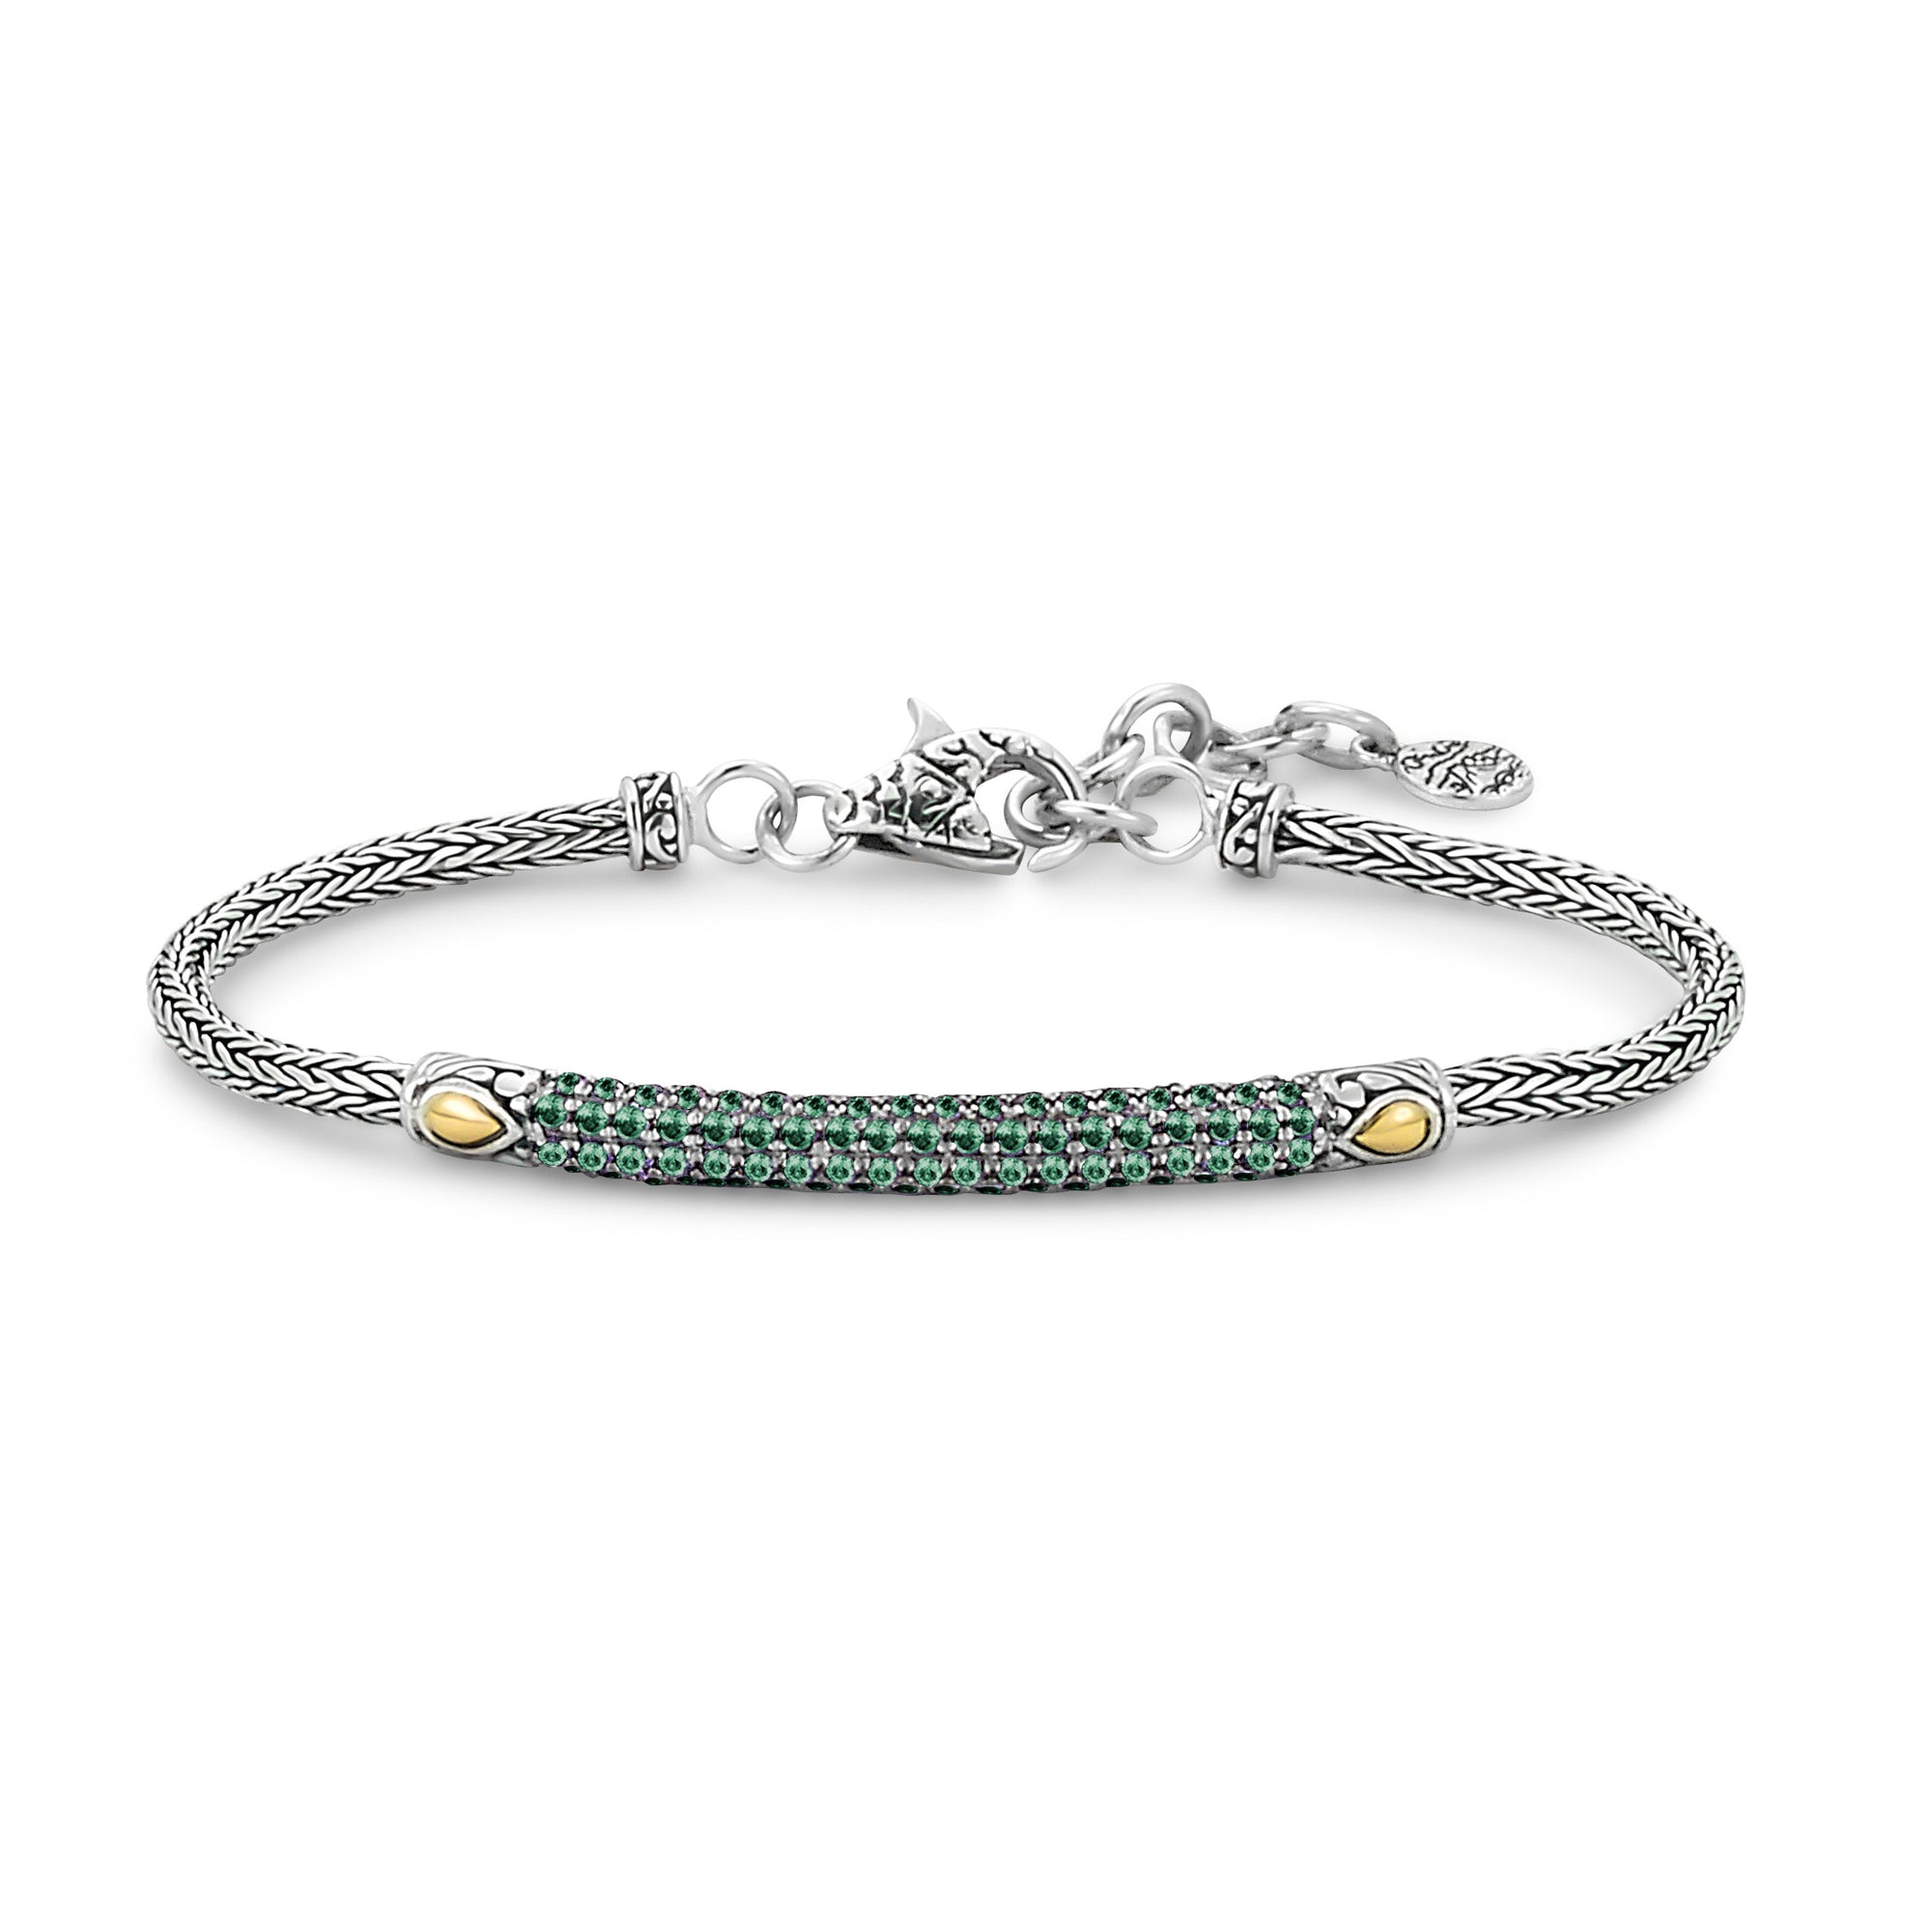 Emerald Glitter Bracelet available at Talisman Collection Fine Jewelers in El Dorado Hills, CA and online. Specs: Sterling Silver, 18k gold, pave emeralds.